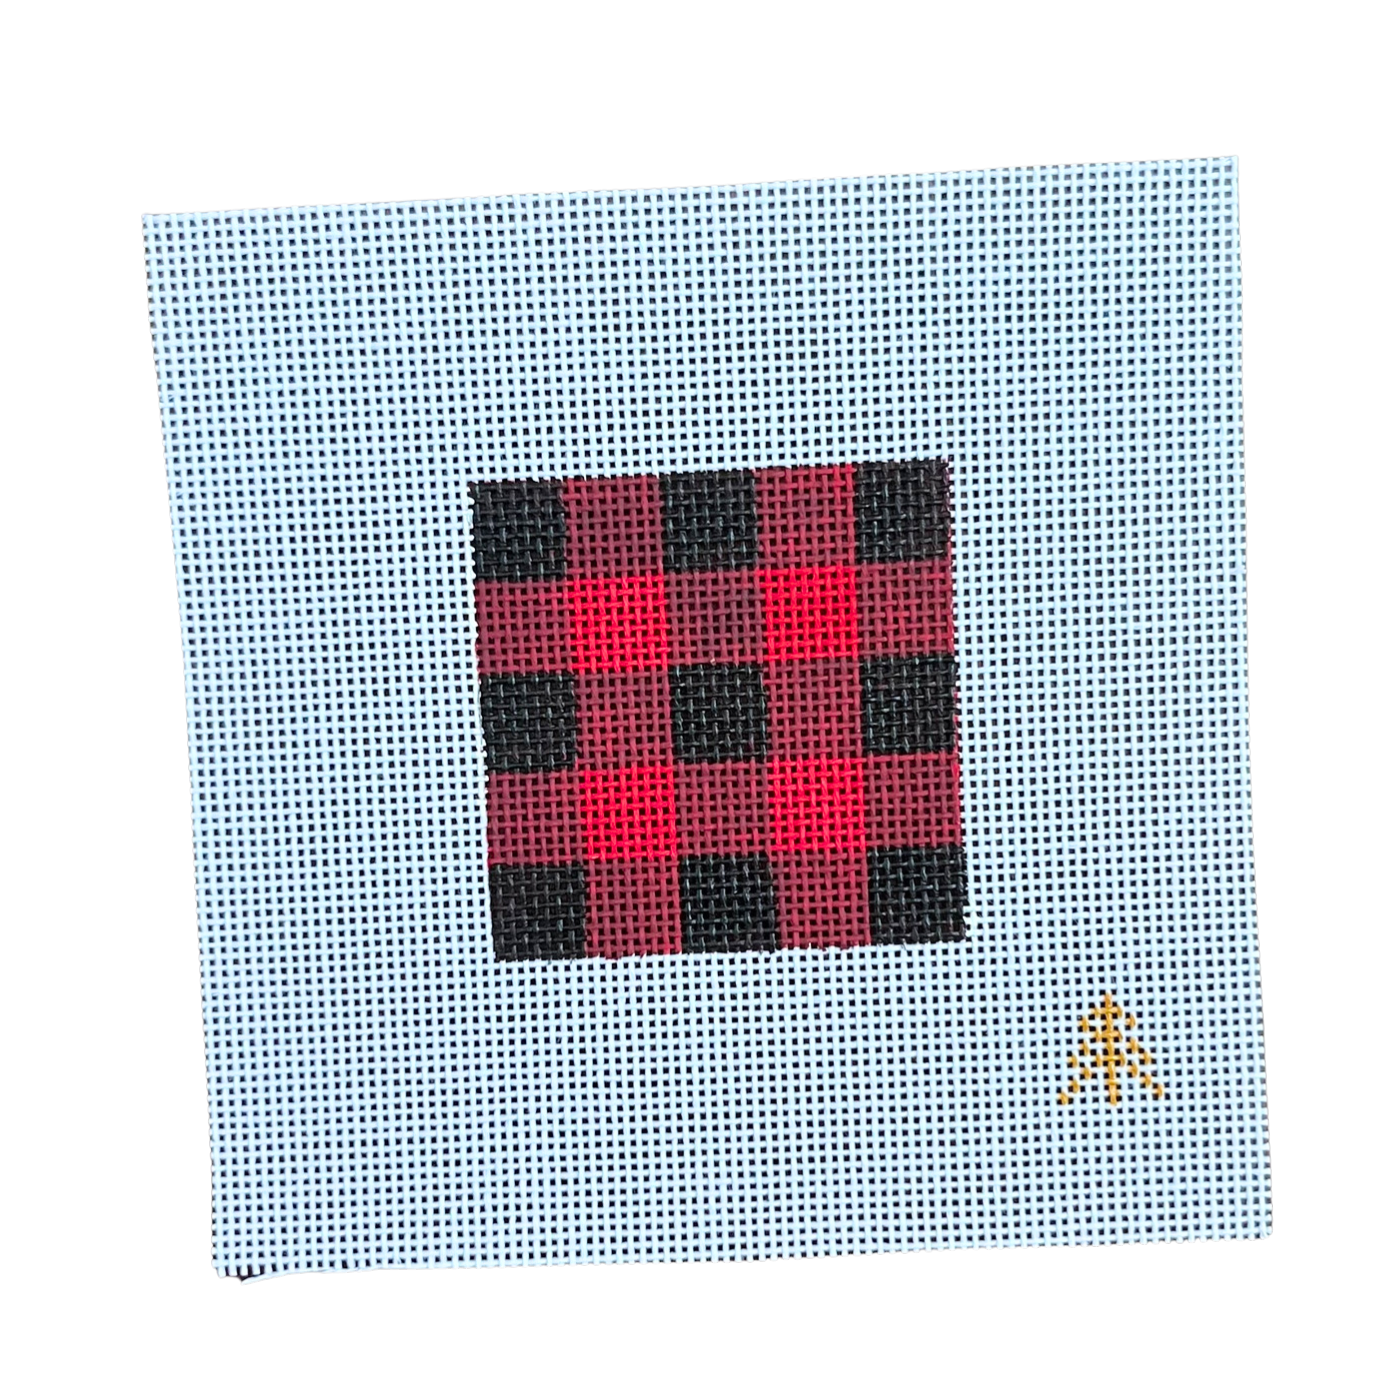 Red and Black Buffalo Check Needlepoint Canvas Insert for Can Cozy